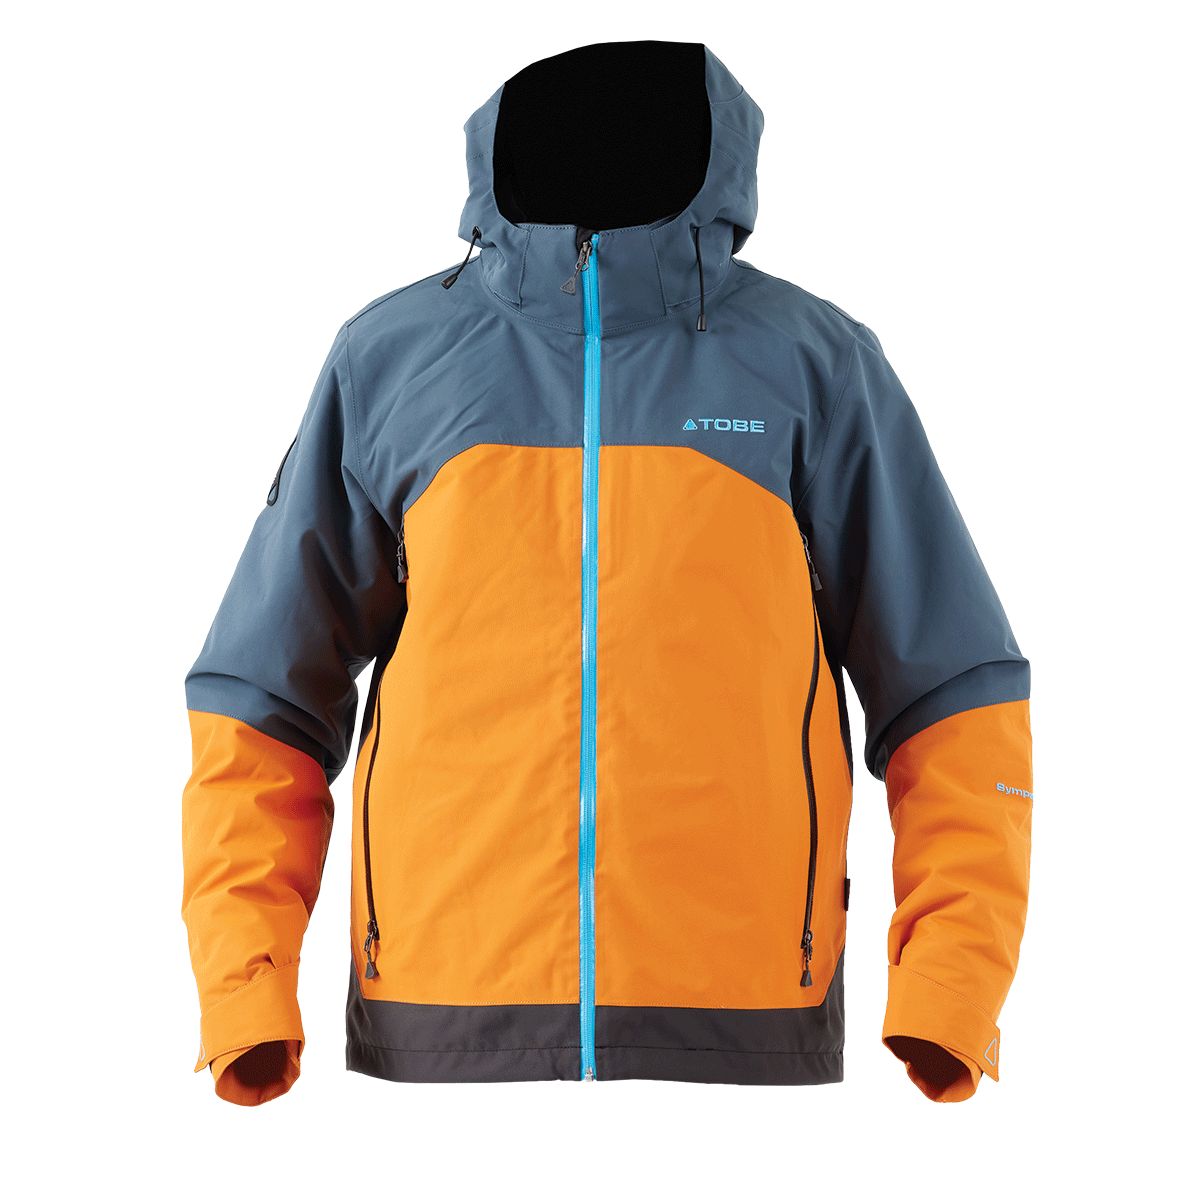 tobe jackets  scope insulated - snowmobile